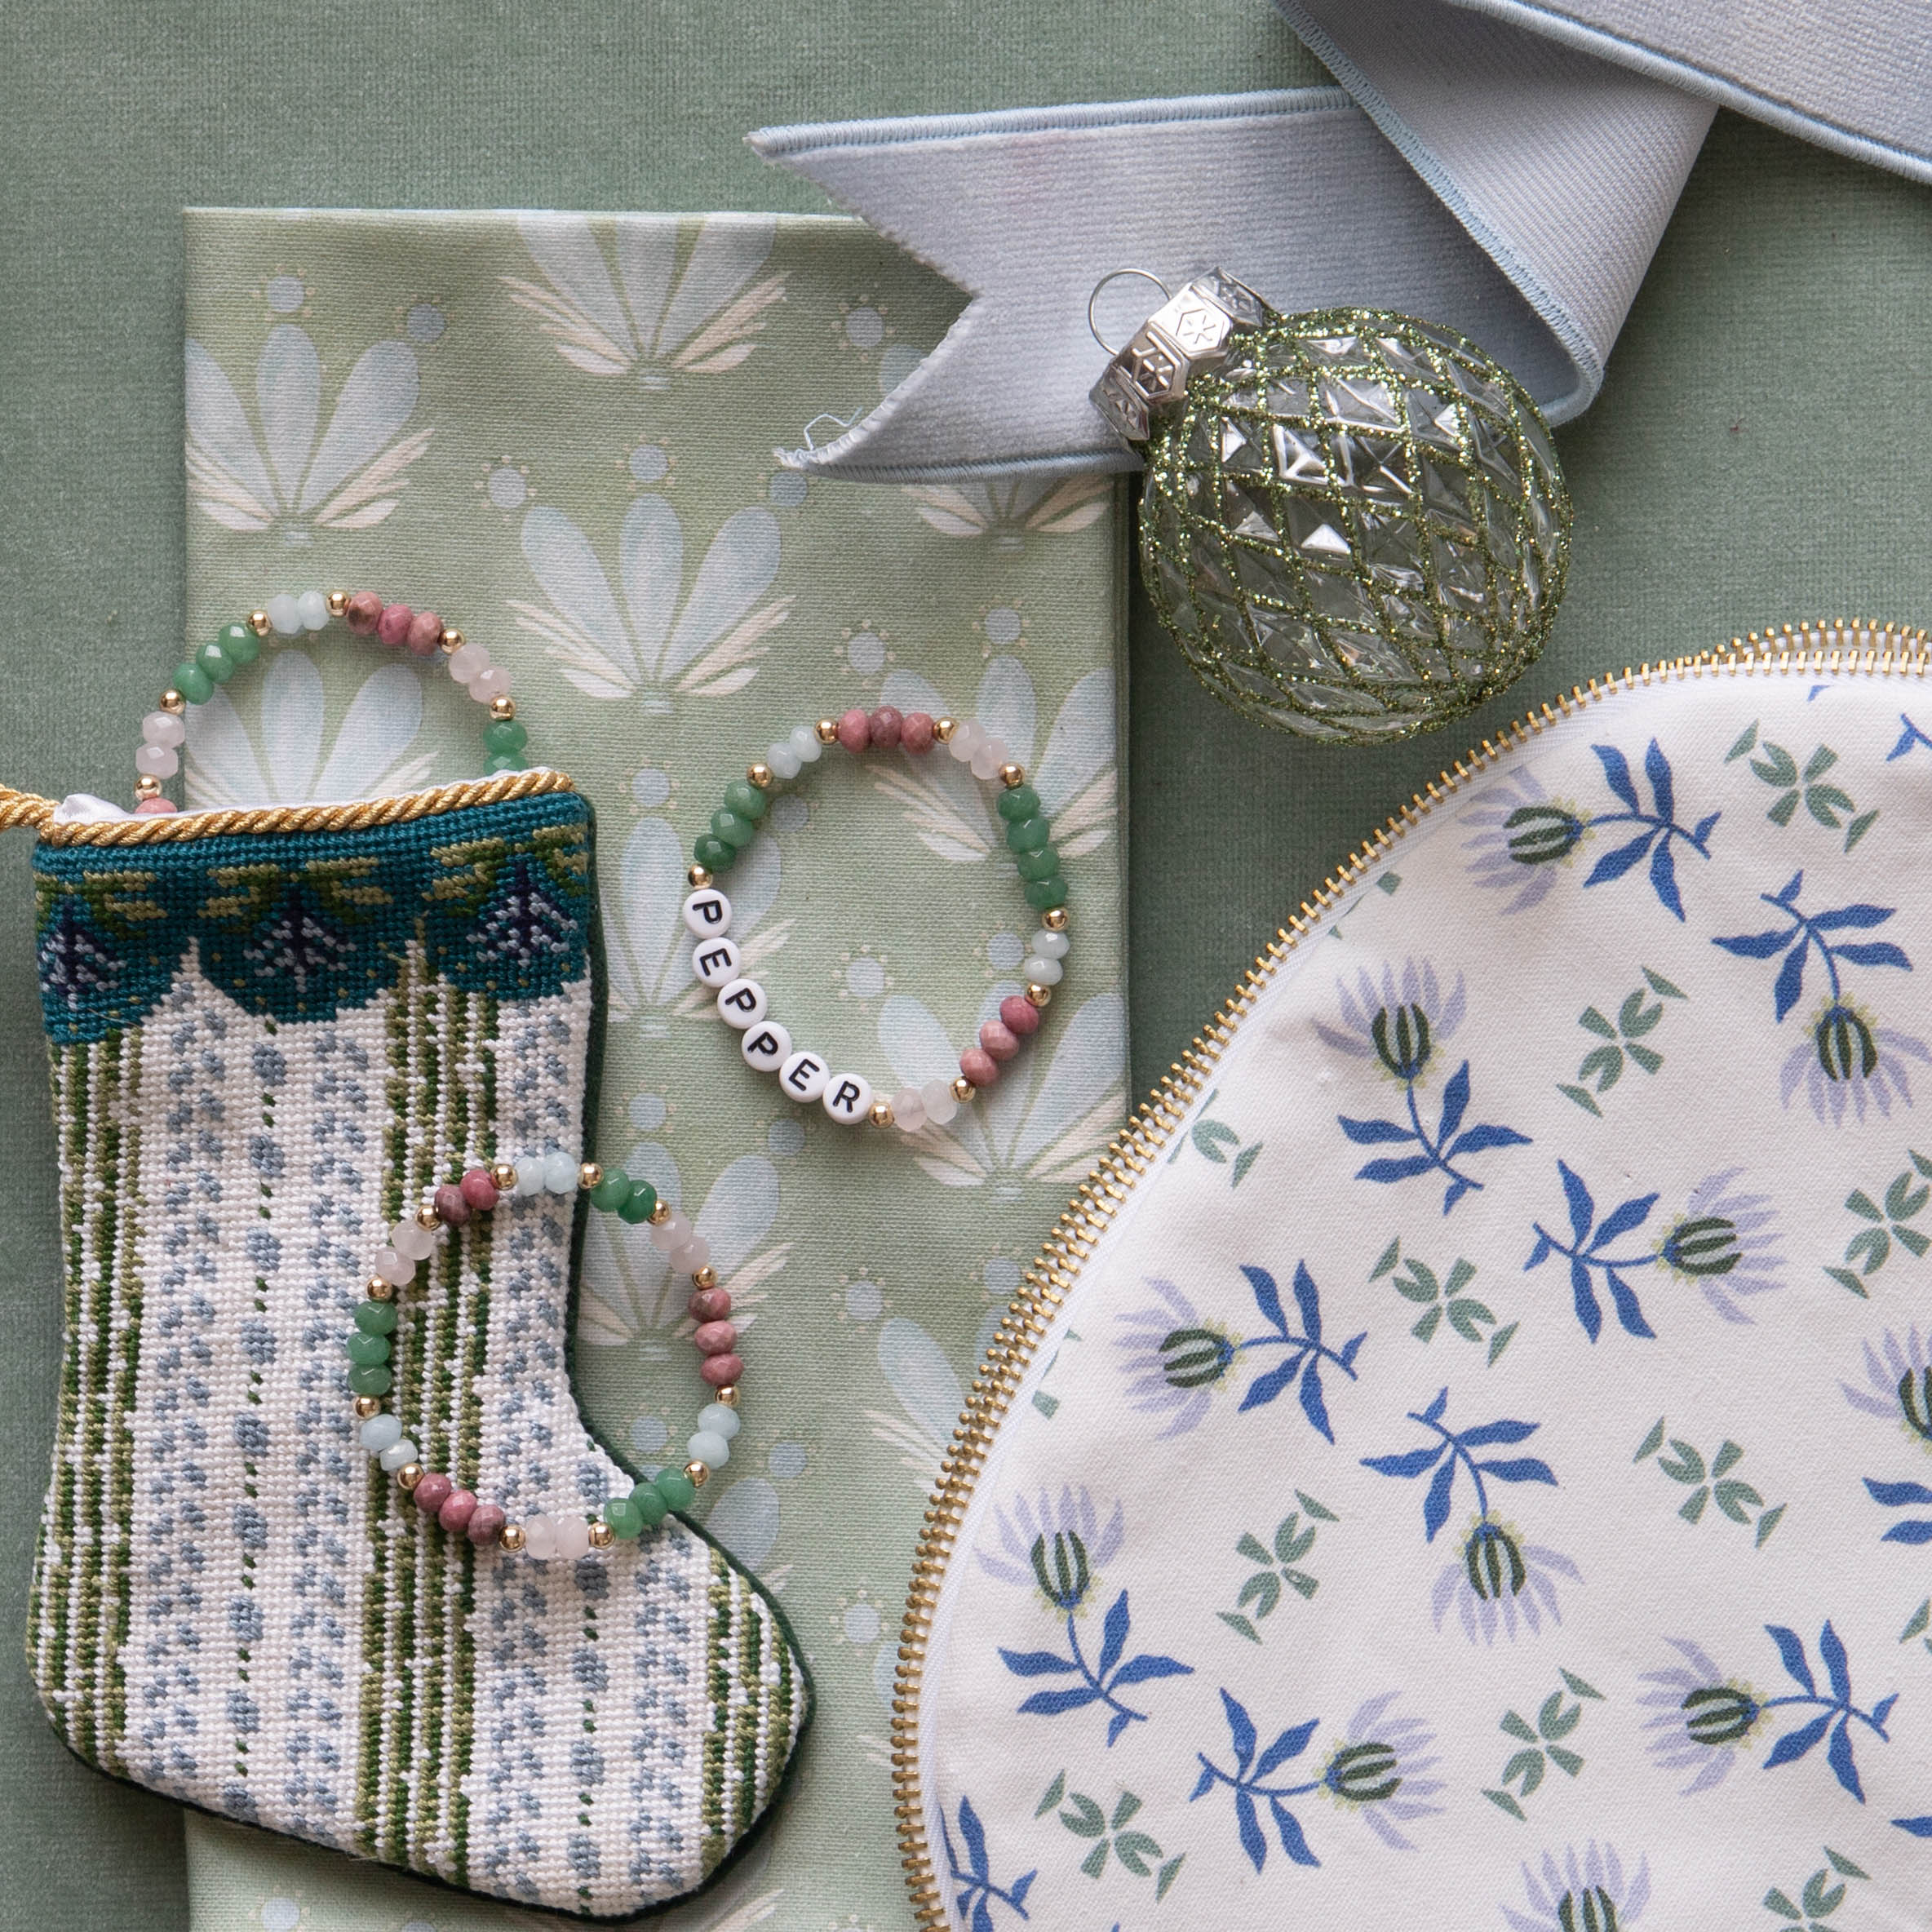 Blue & Green Striped Hand Sown Mini Bauble Stocking on Coastal Inspired Green and Blue Printed Swatch next to Blue & Green Floral Printed Pouch and three beaded bracelets by Christmas ornament 